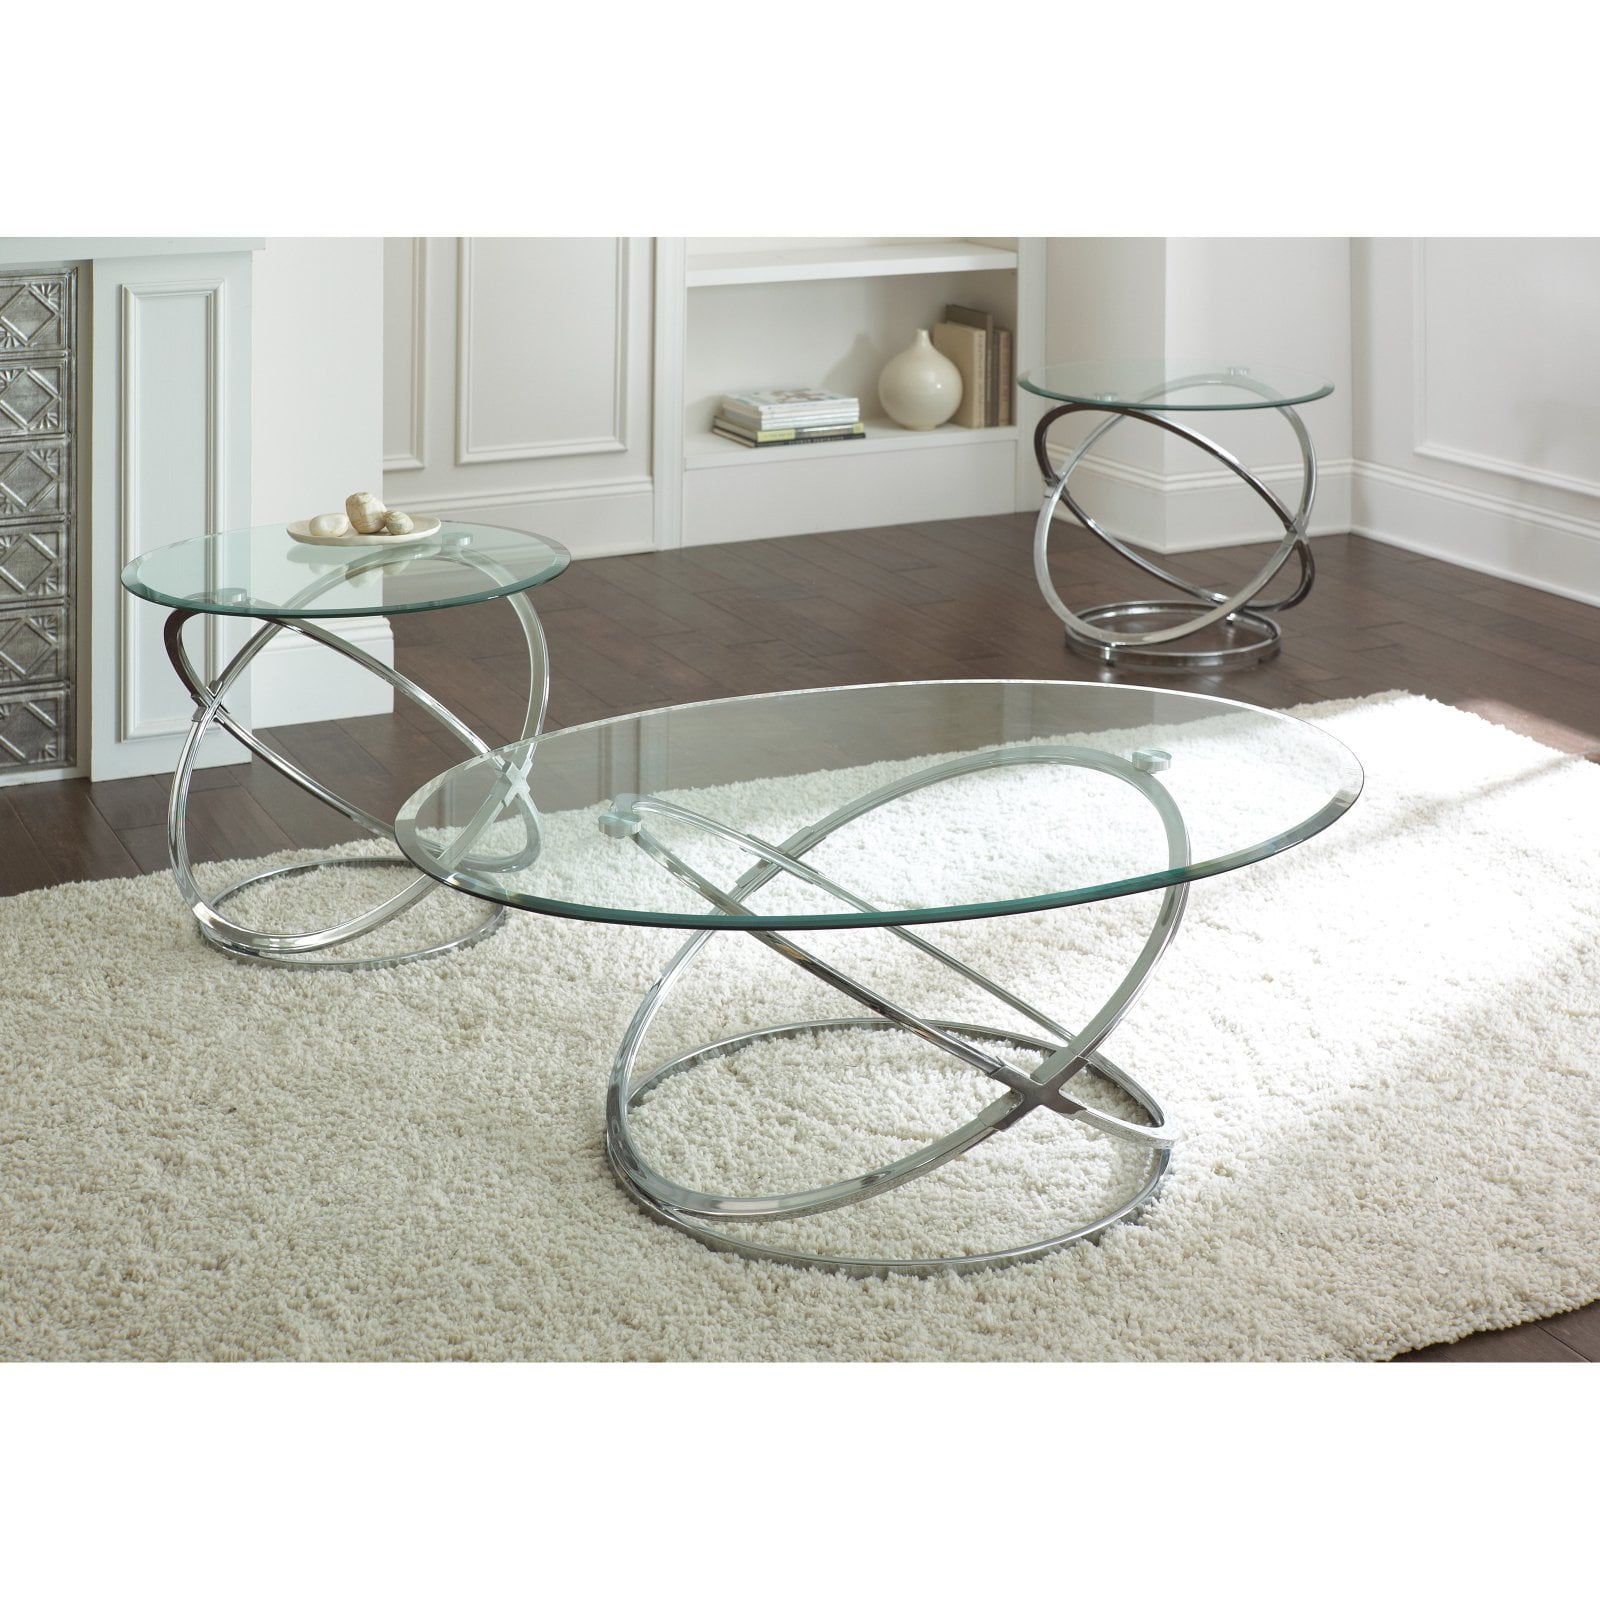 Steve Silver Orion Oval Chrome And Glass Coffee Table Set – Walmart Inside Oval Glass Coffee Tables (View 15 of 15)